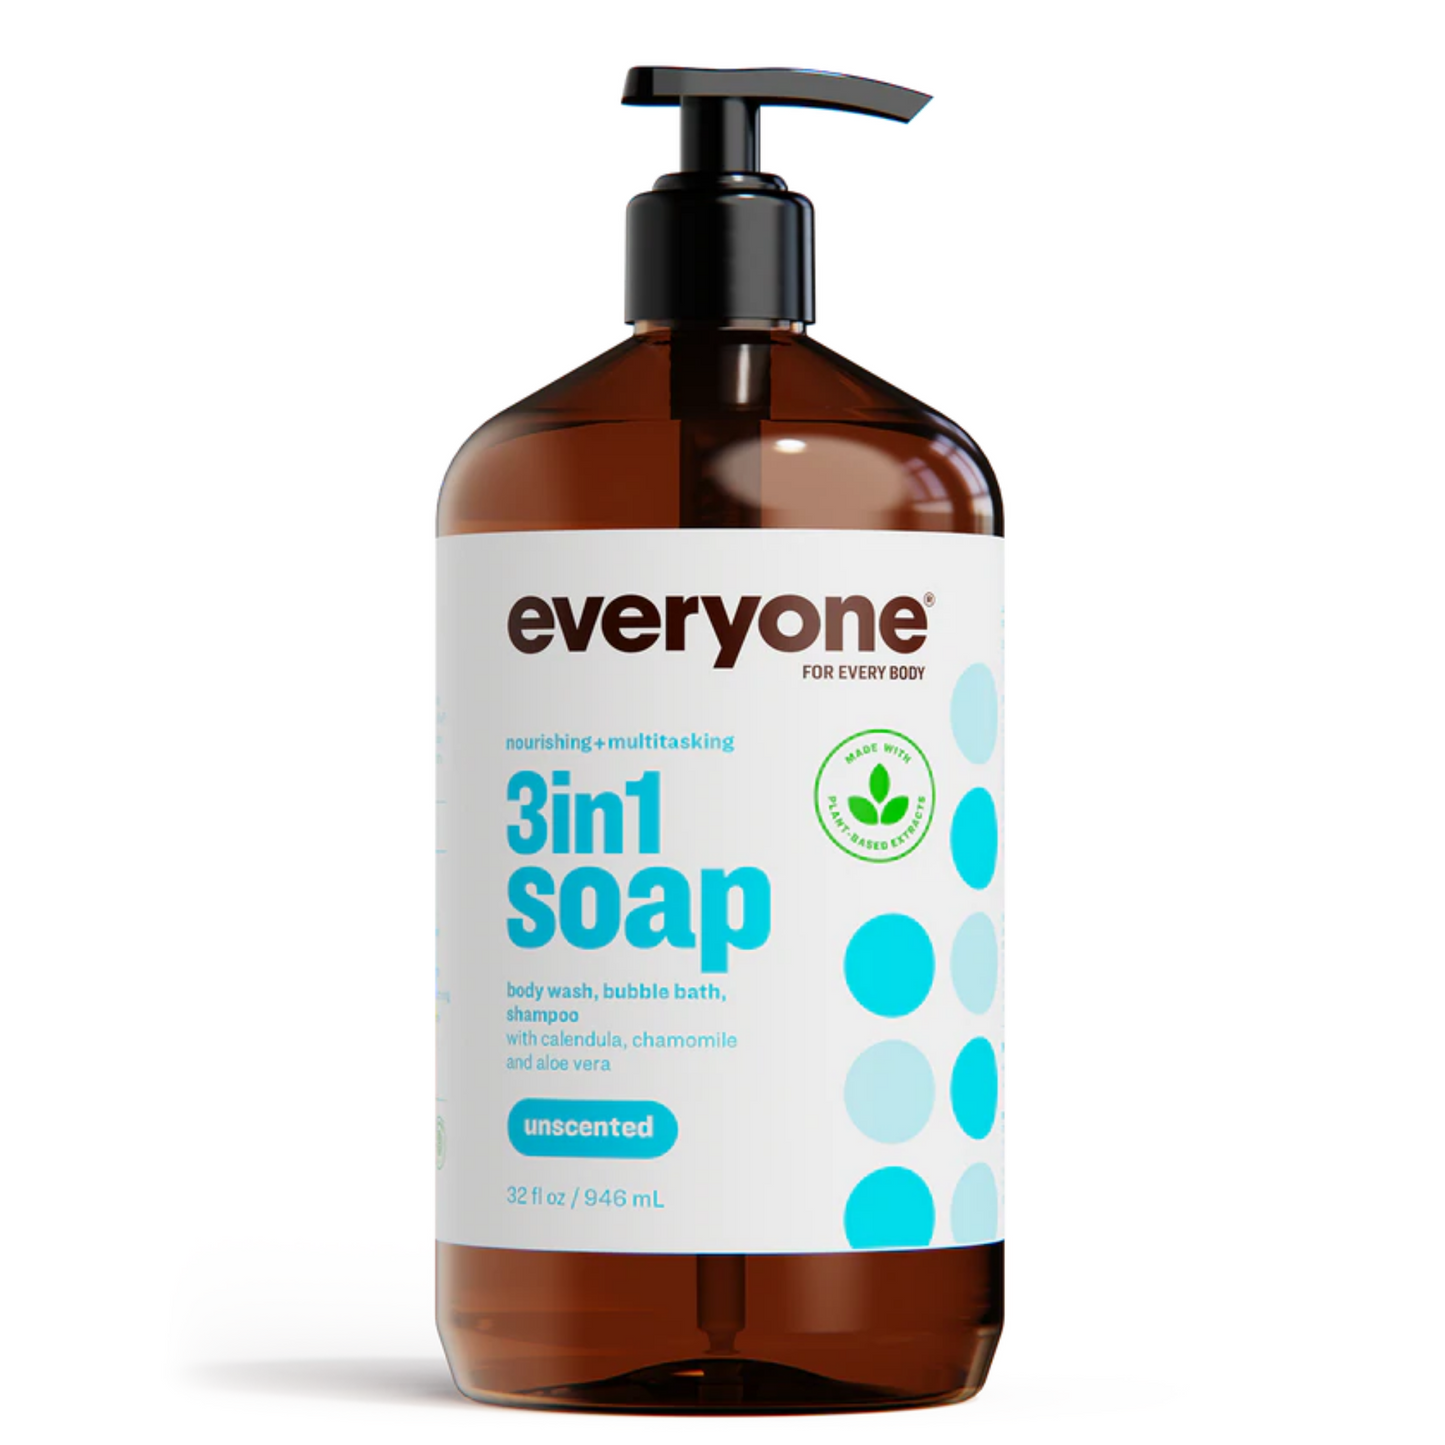 Primary image of Everyone 3-in-1 Unscented Soap